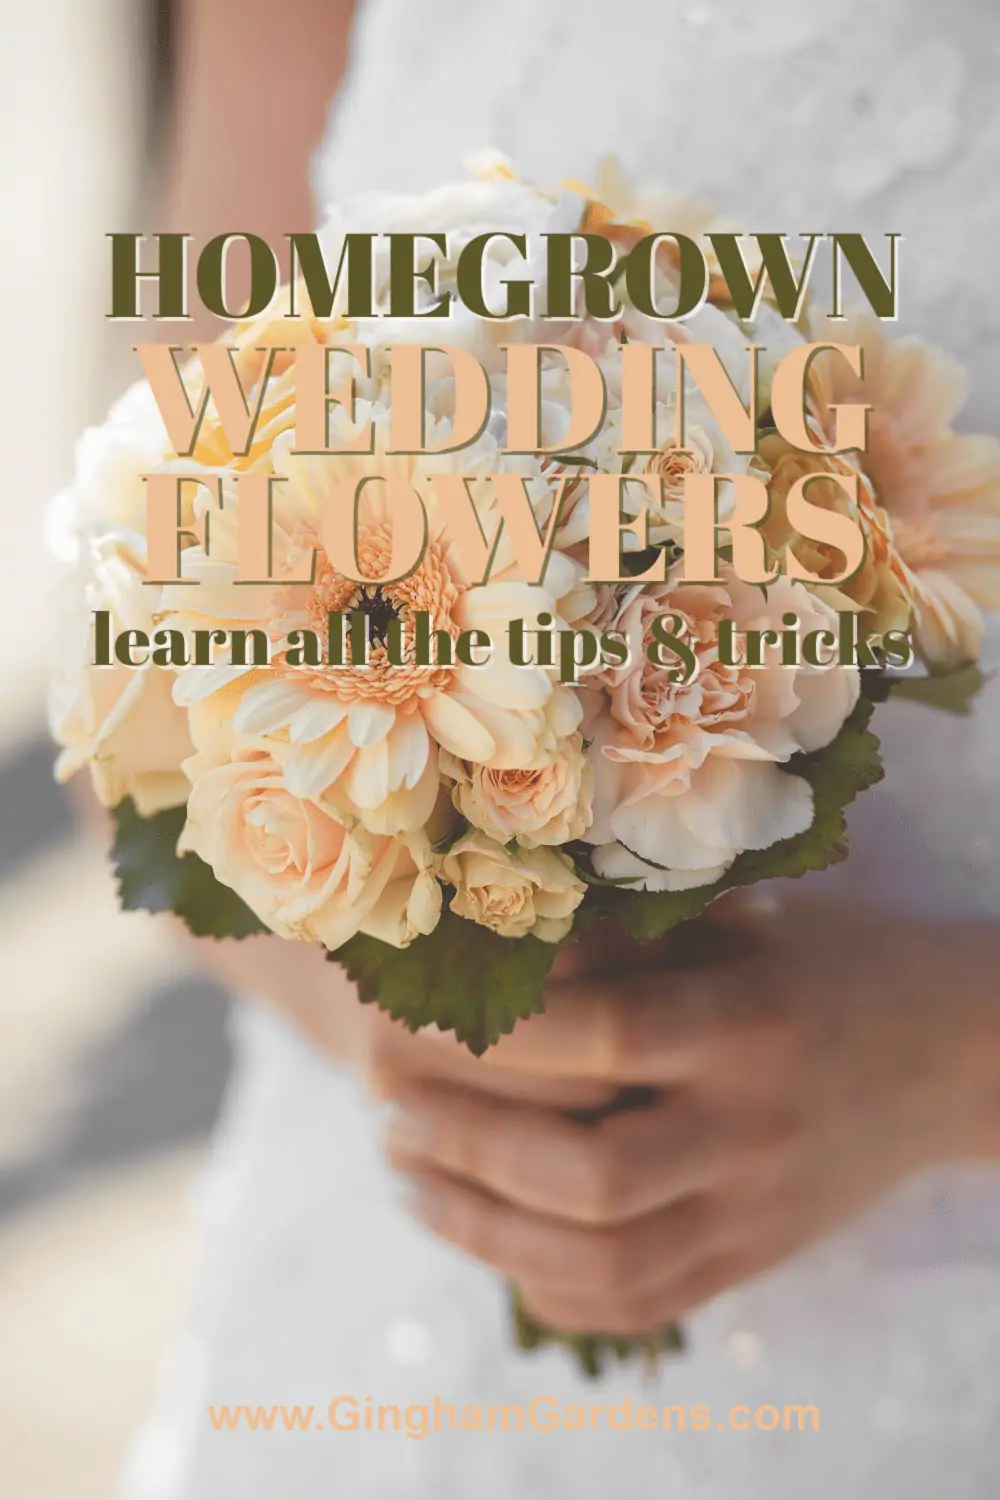 Image of a bride holding a bouquet with text overlay - Homegrown wedding flowers